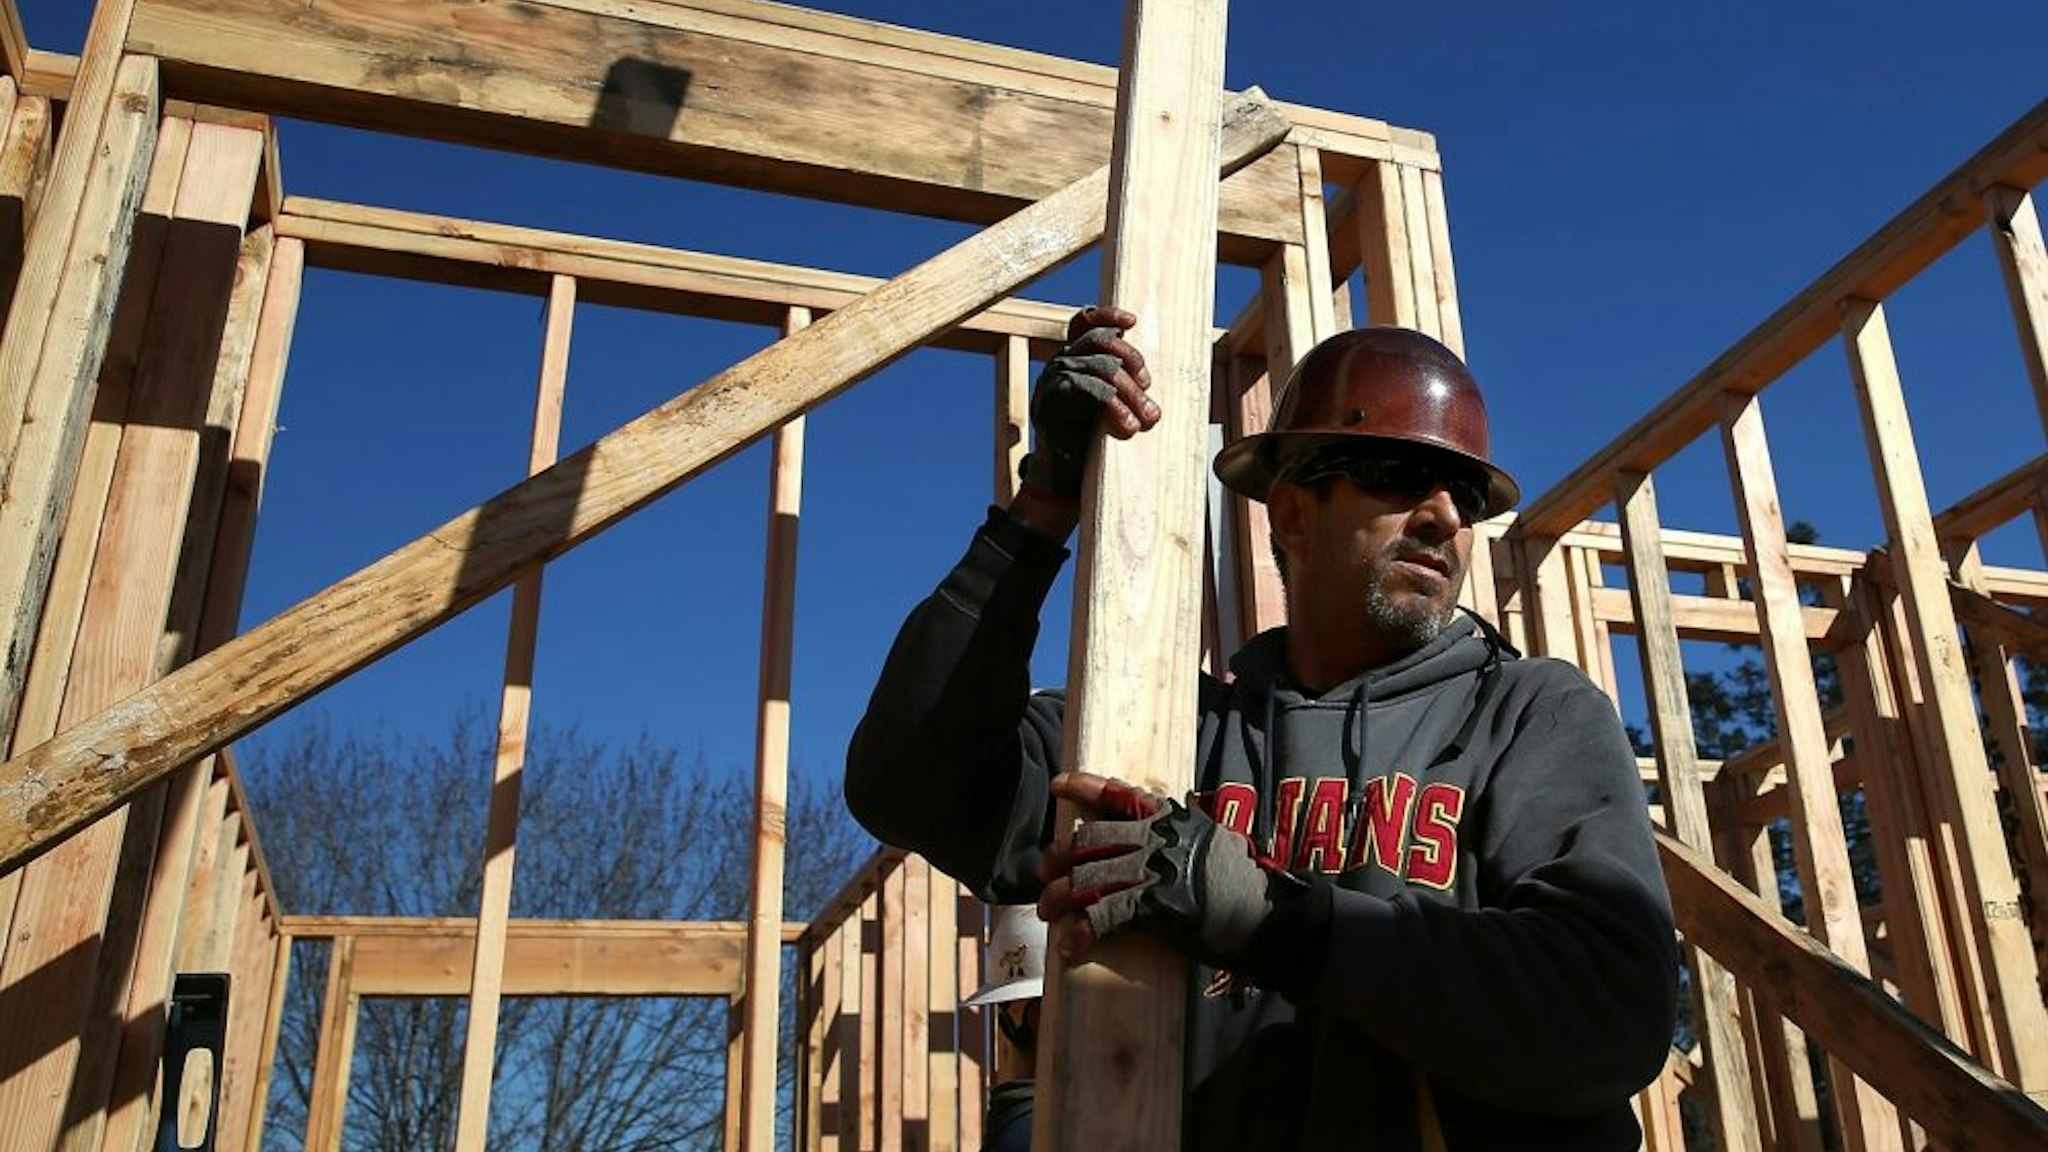 PETALUMA, CA - JANUARY 21: A worker carries lumber as he builds a new home on January 21, 2015 in Petaluma, California. According to a Commerce Department report, construction of new homes increased 4.4 percent in December, pushing building of new homes to the highest level in nine years.